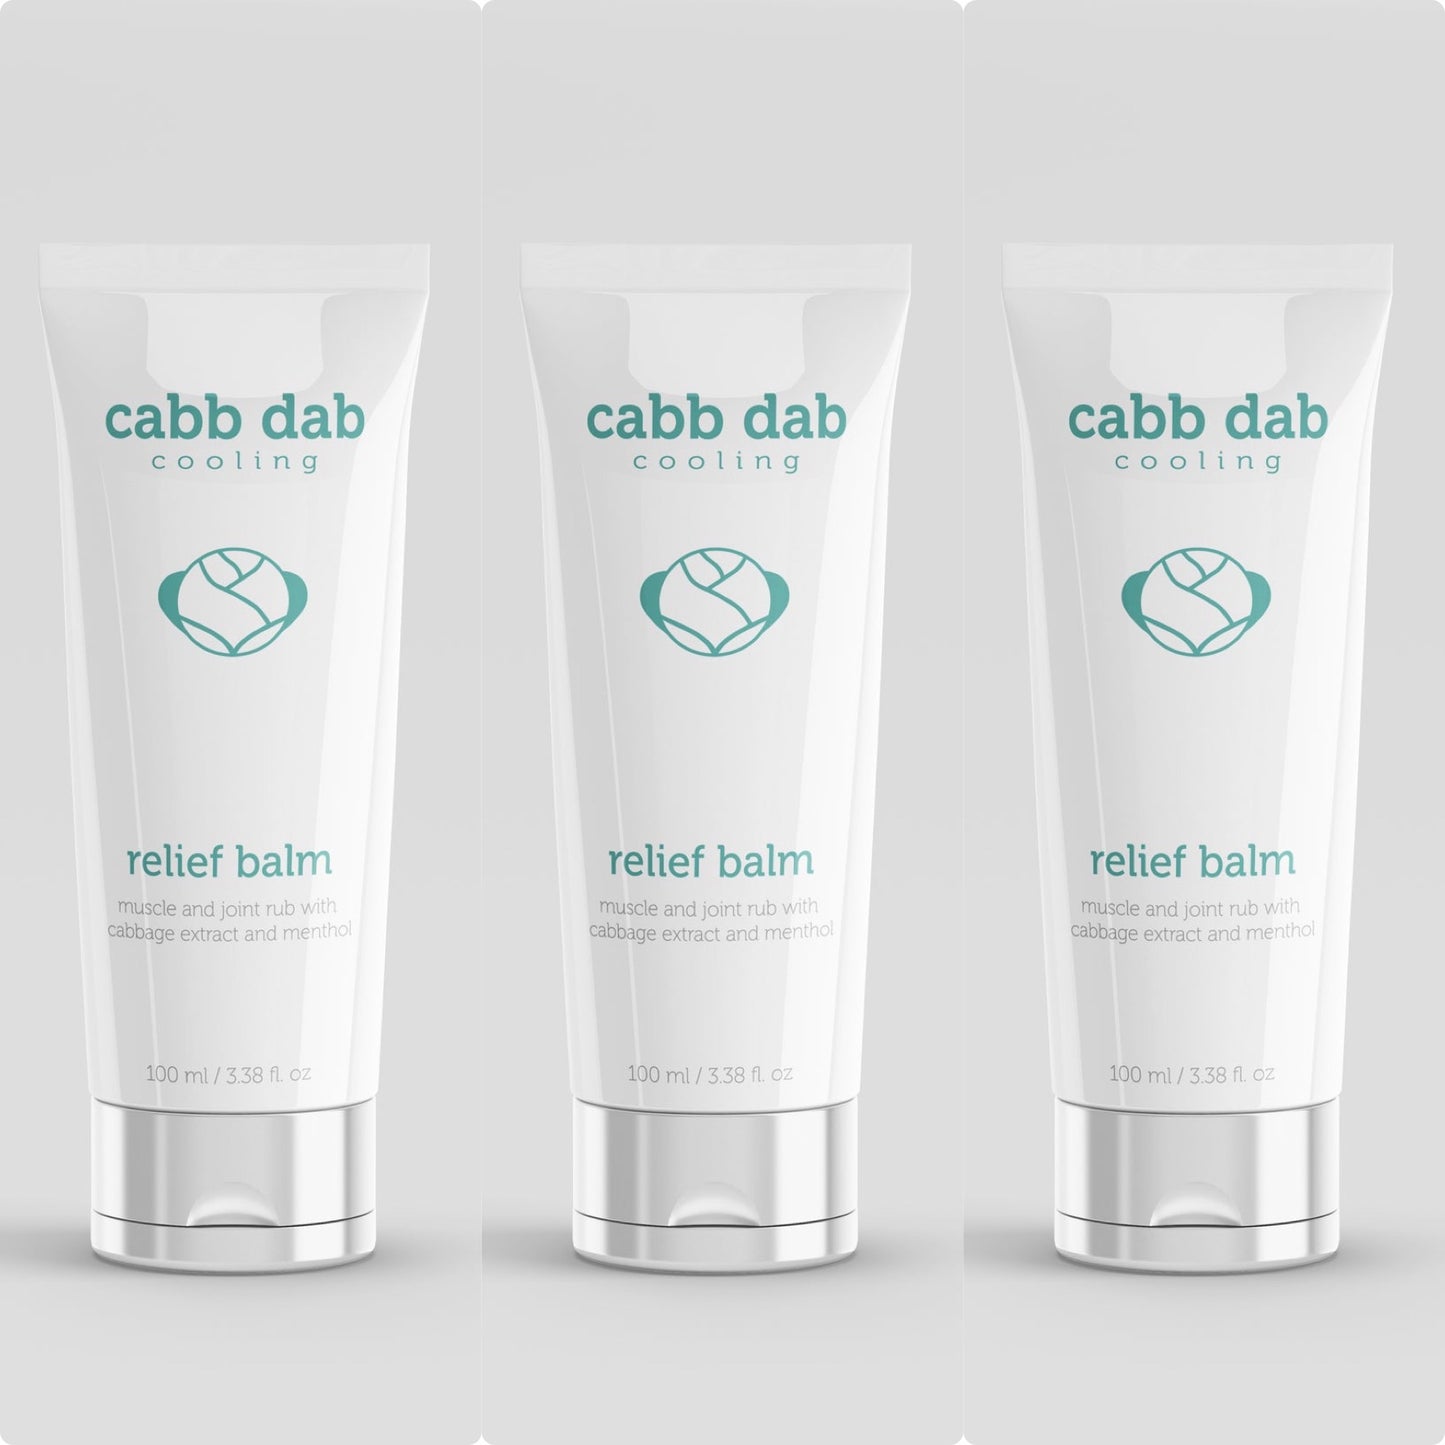 3-pack cabb dab cooling relief balm with real cabbage leaf extract and menthol